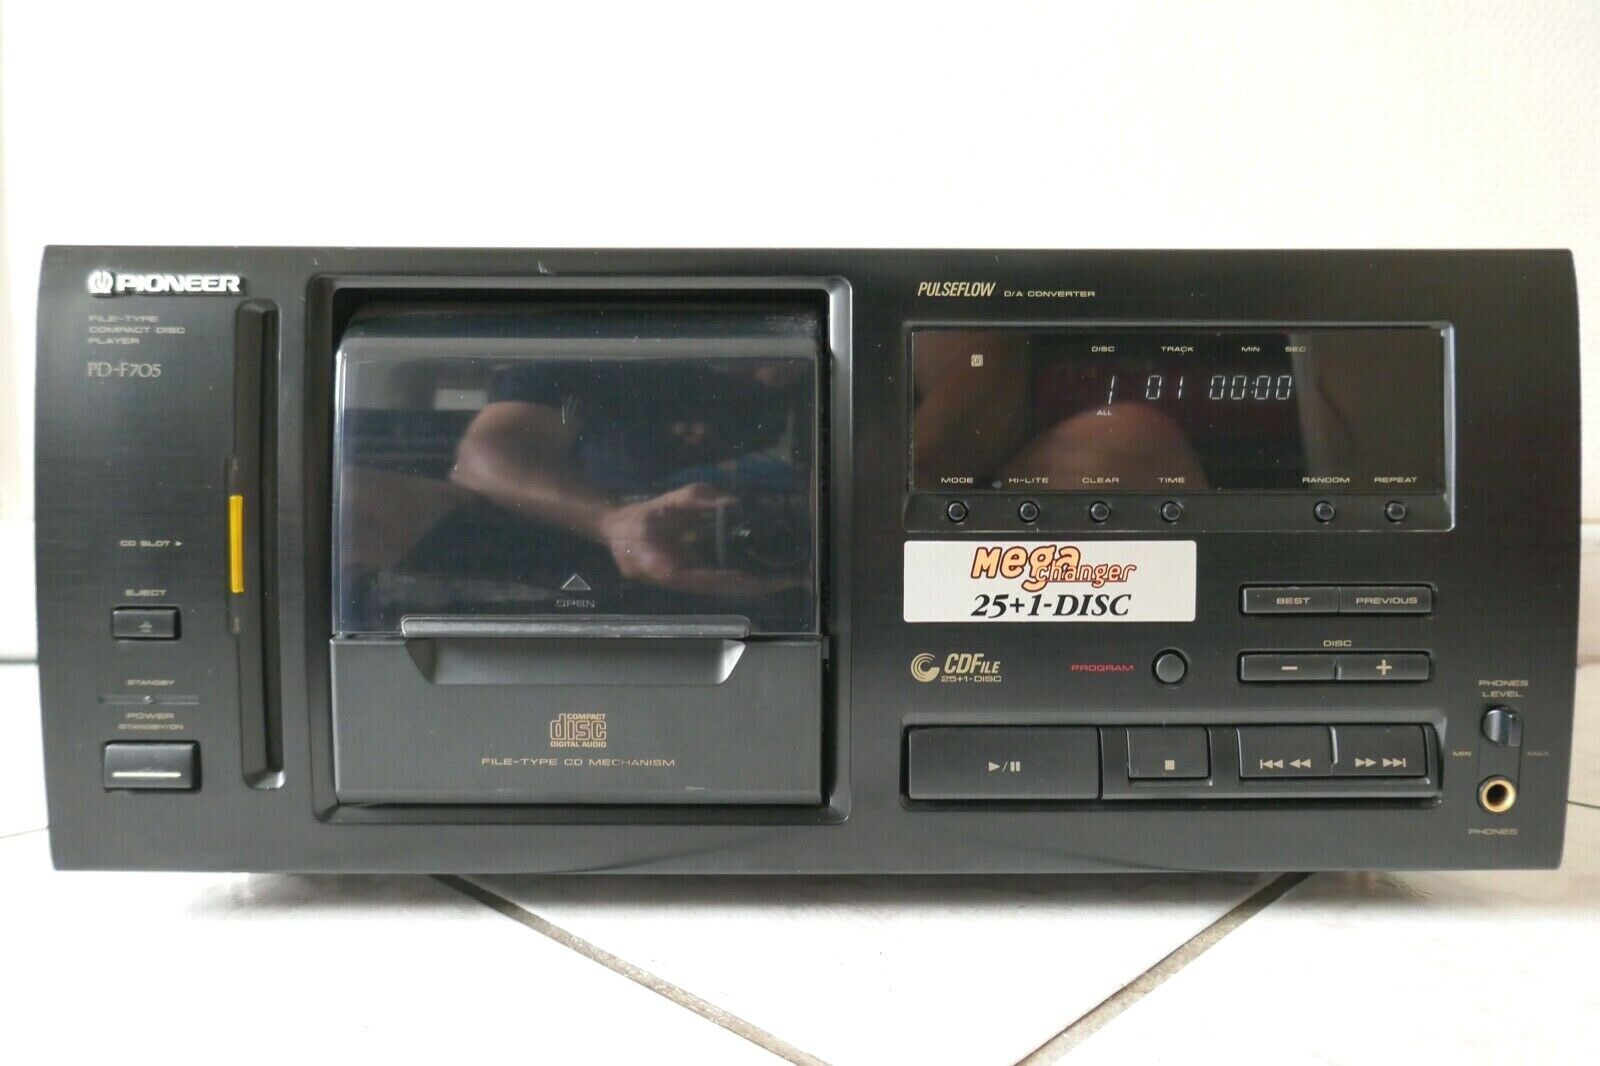 LECTEUR COMPACT DISC PIONEER FILE-TYPE COMPACT DISC PLAYER PD-F705